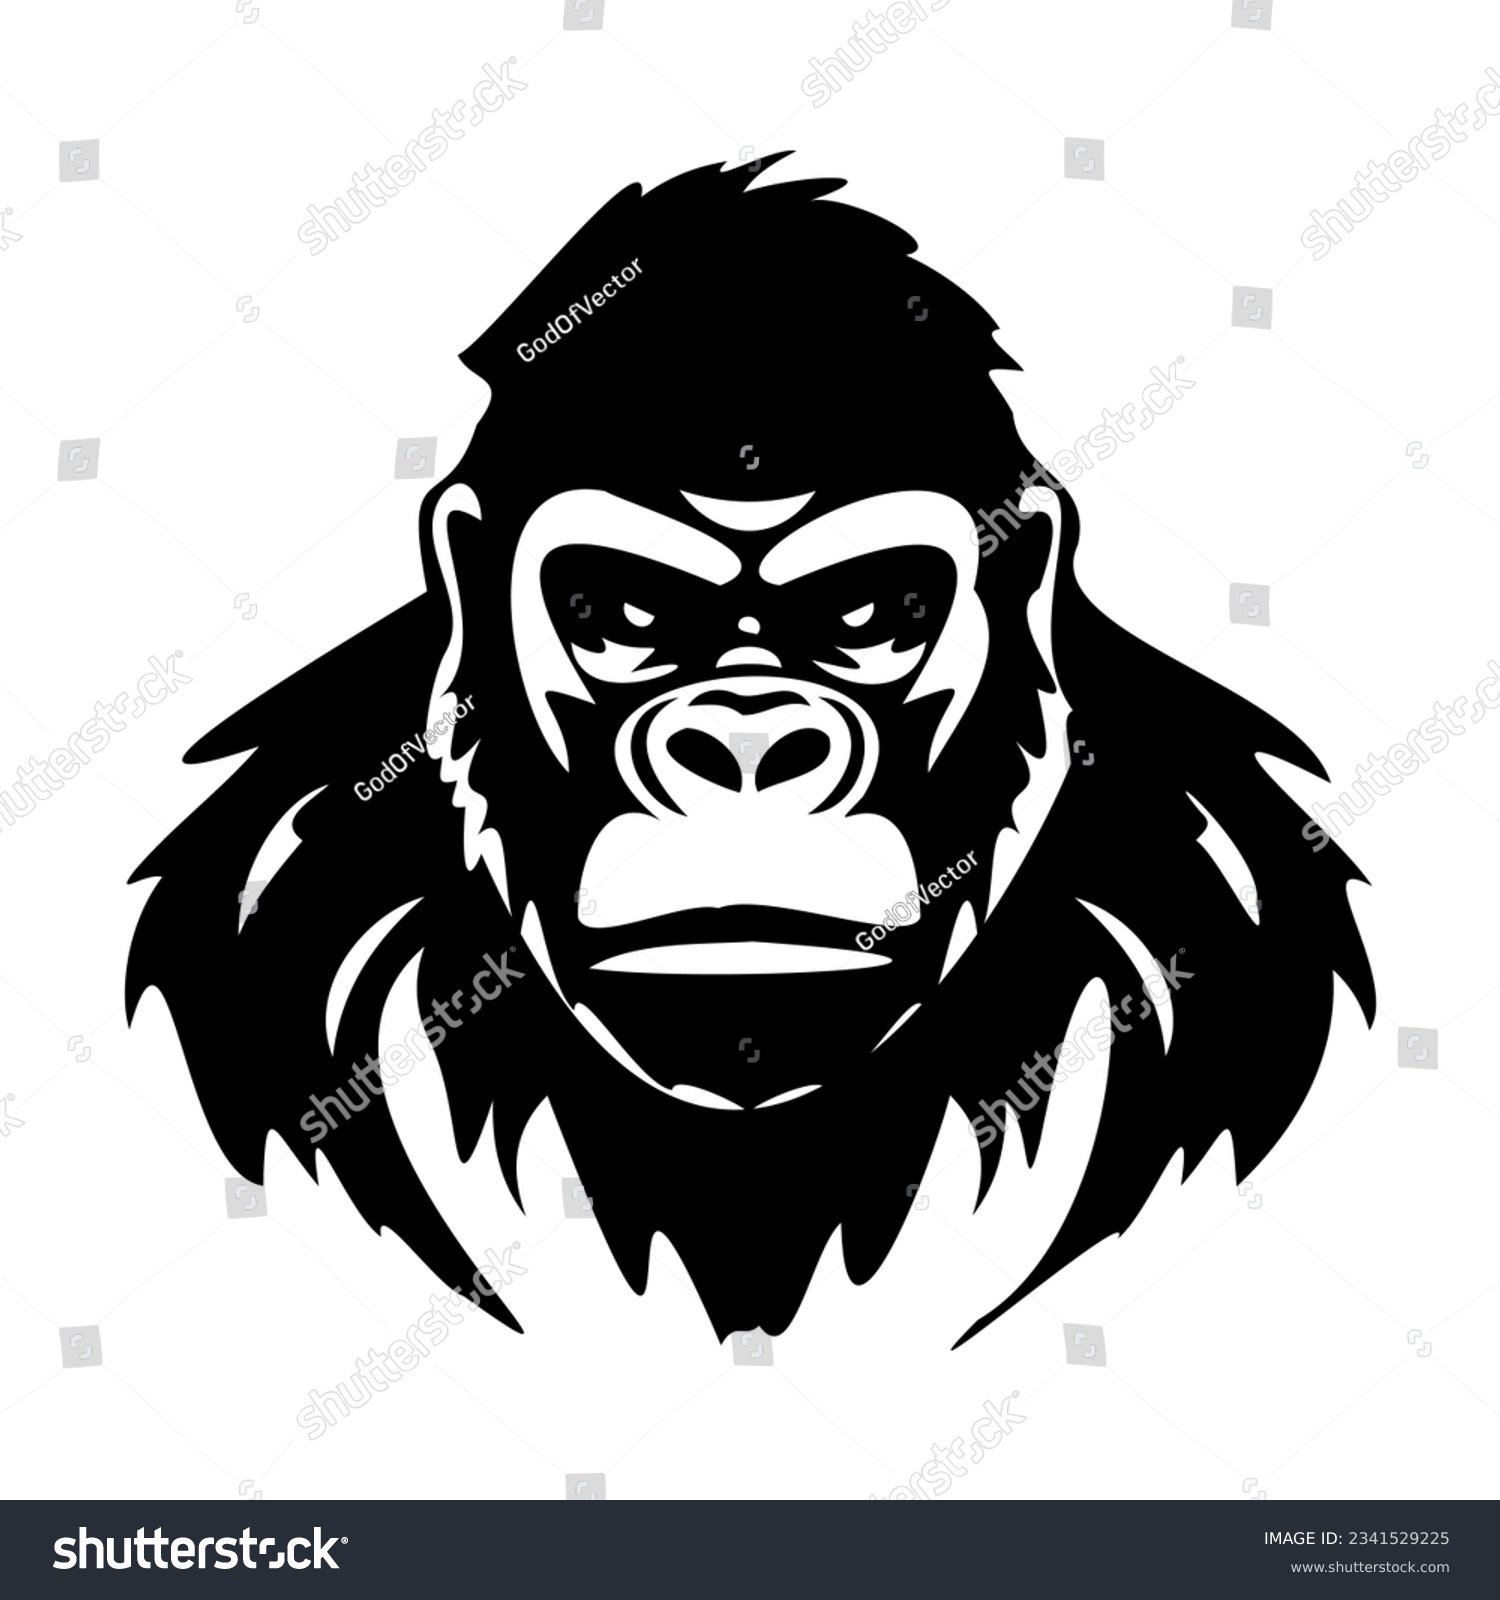 SVG of Gorilla line icon. Monkey, Cro-Magnon, Africa, giant, hair, beast, circus, Congo. Black vector icons on a white background for Business svg